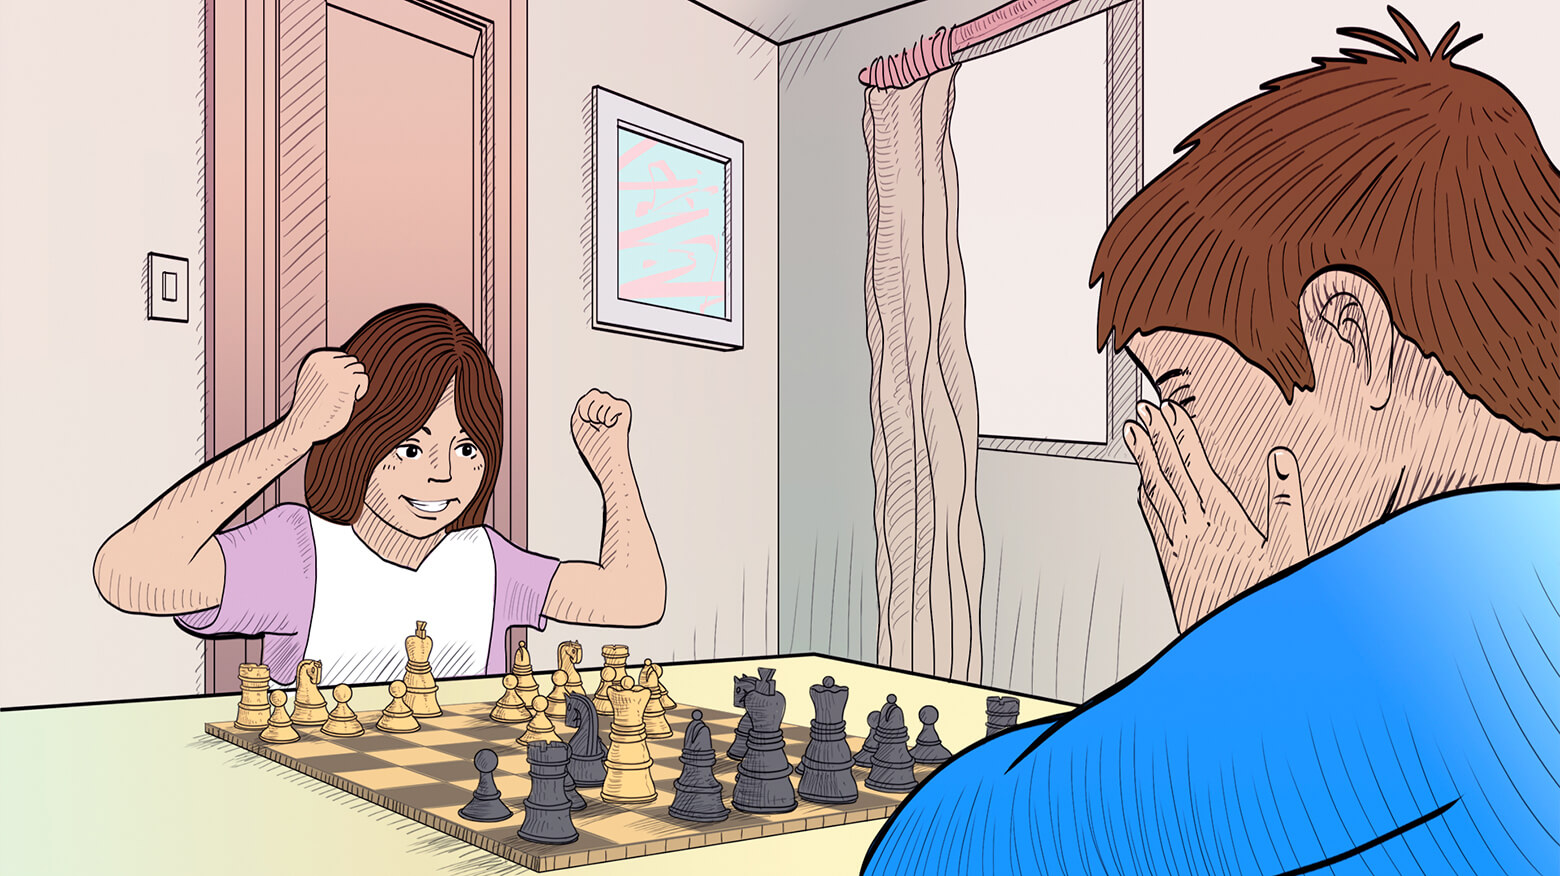 How to Win at Chess (with Pictures) - wikiHow